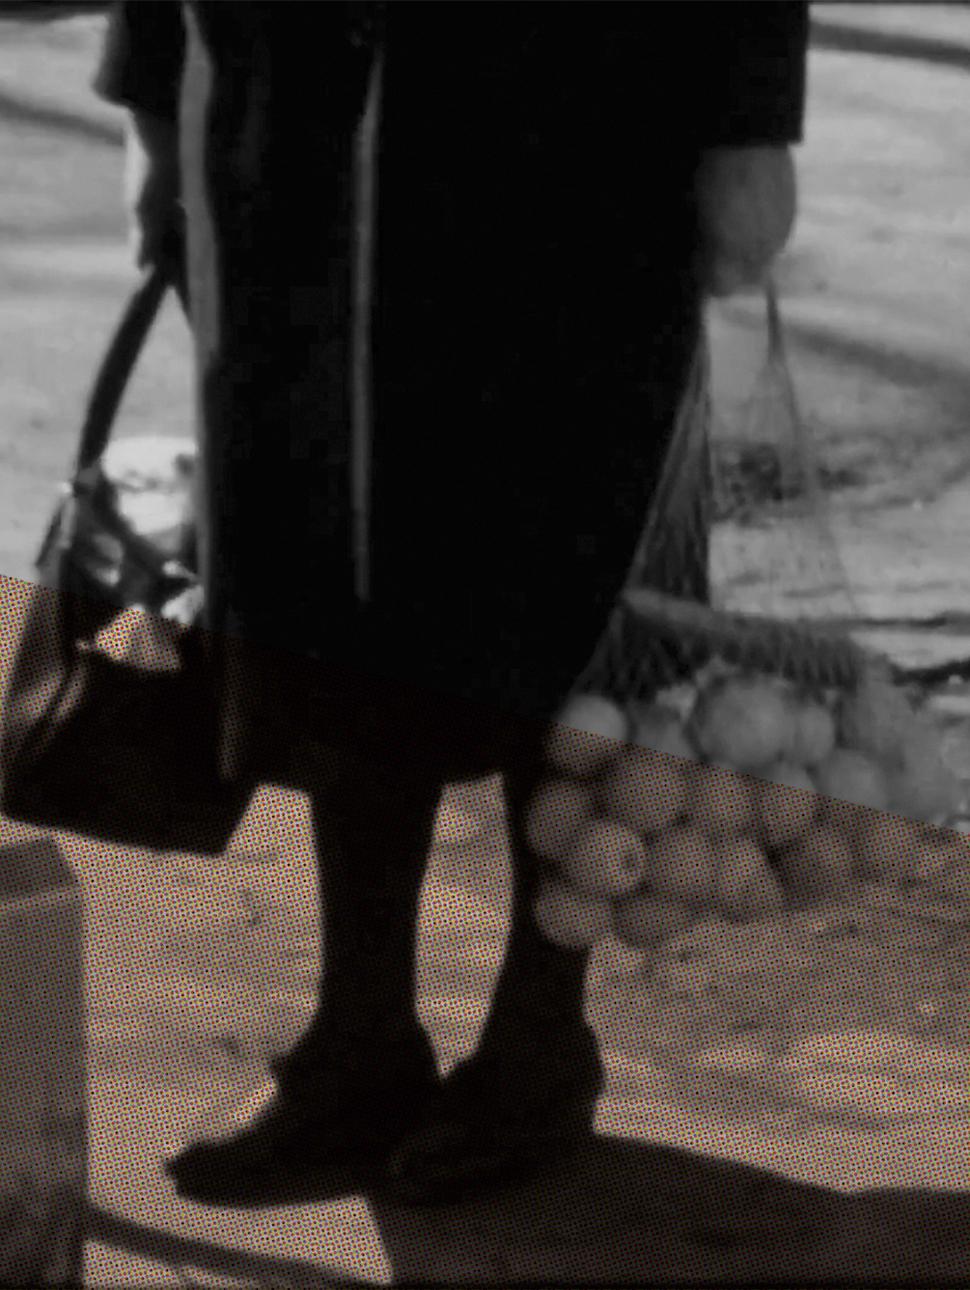 A black and white image of an older woman's knees, her hands holding a bag of oranges